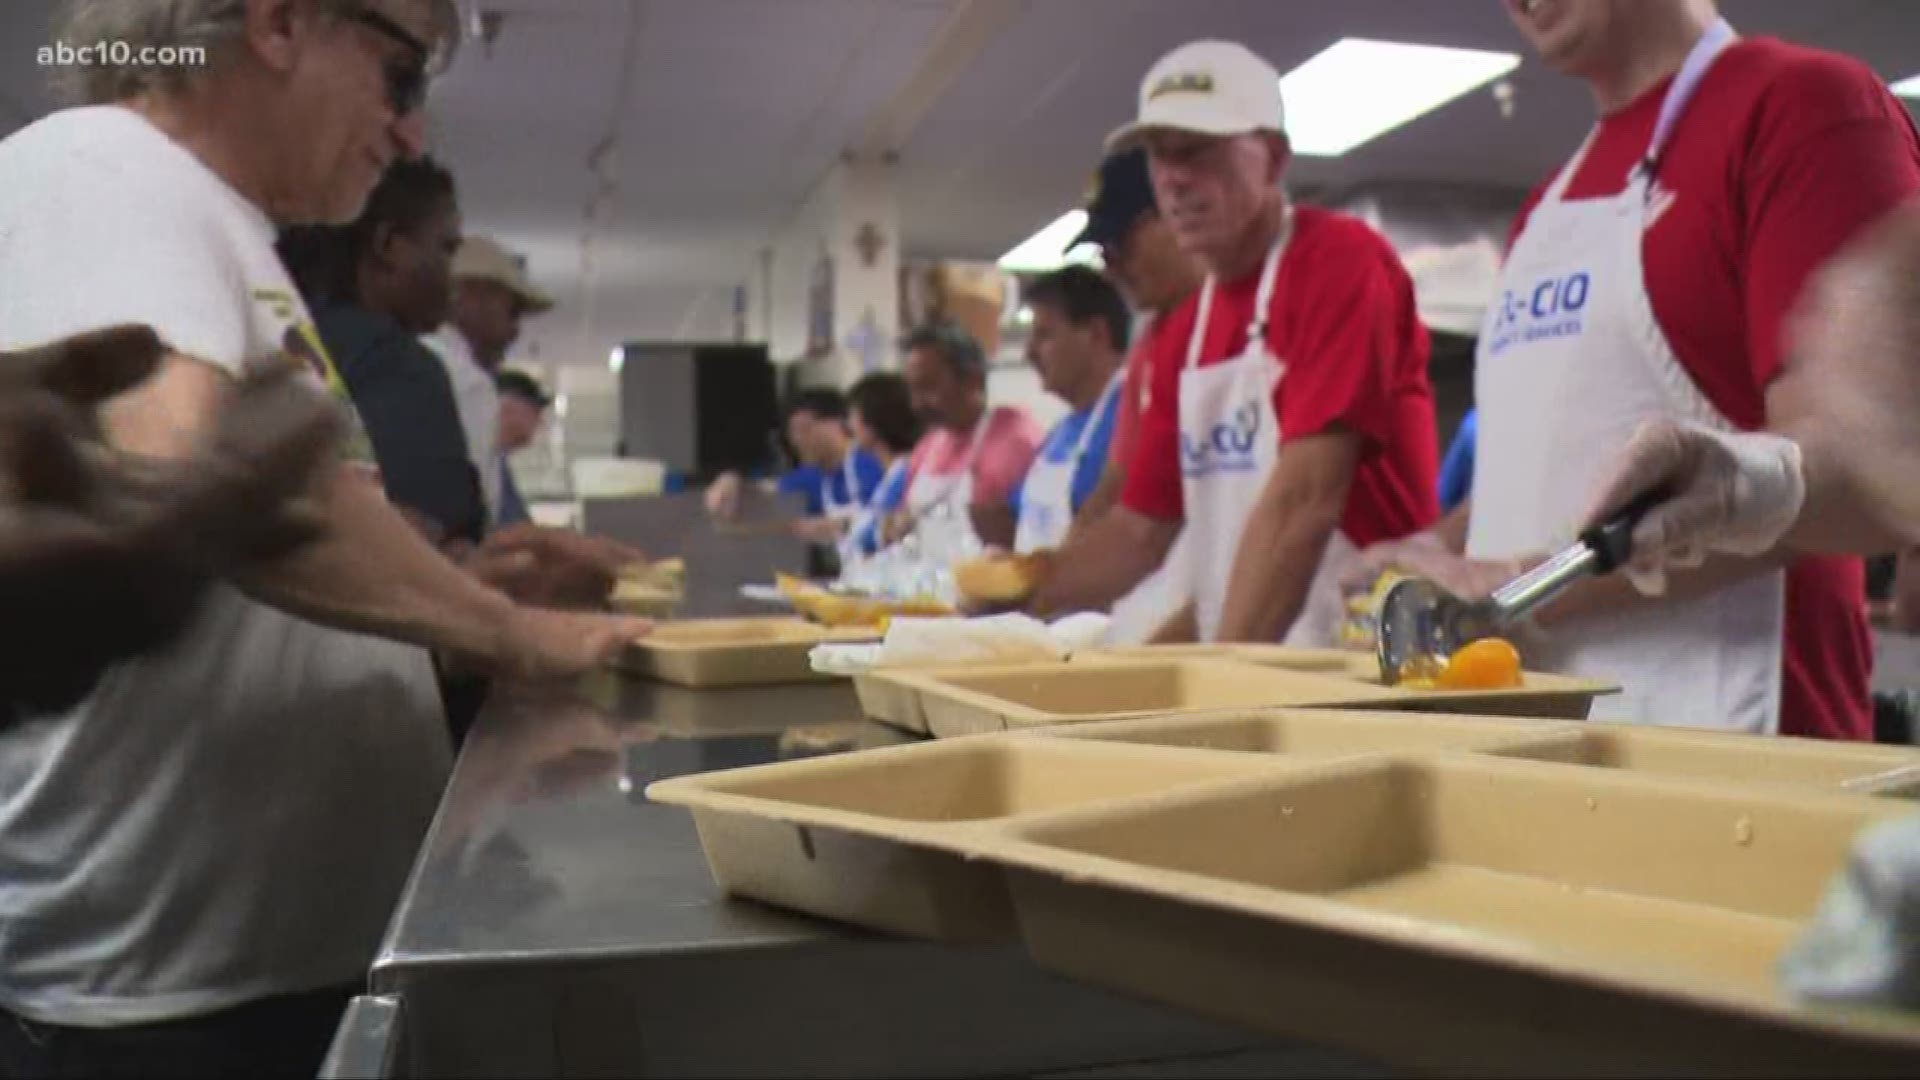 More than 80 union workers in the Sacramento region spent Labor Day serving the homeless community at Loaves and Fishes.